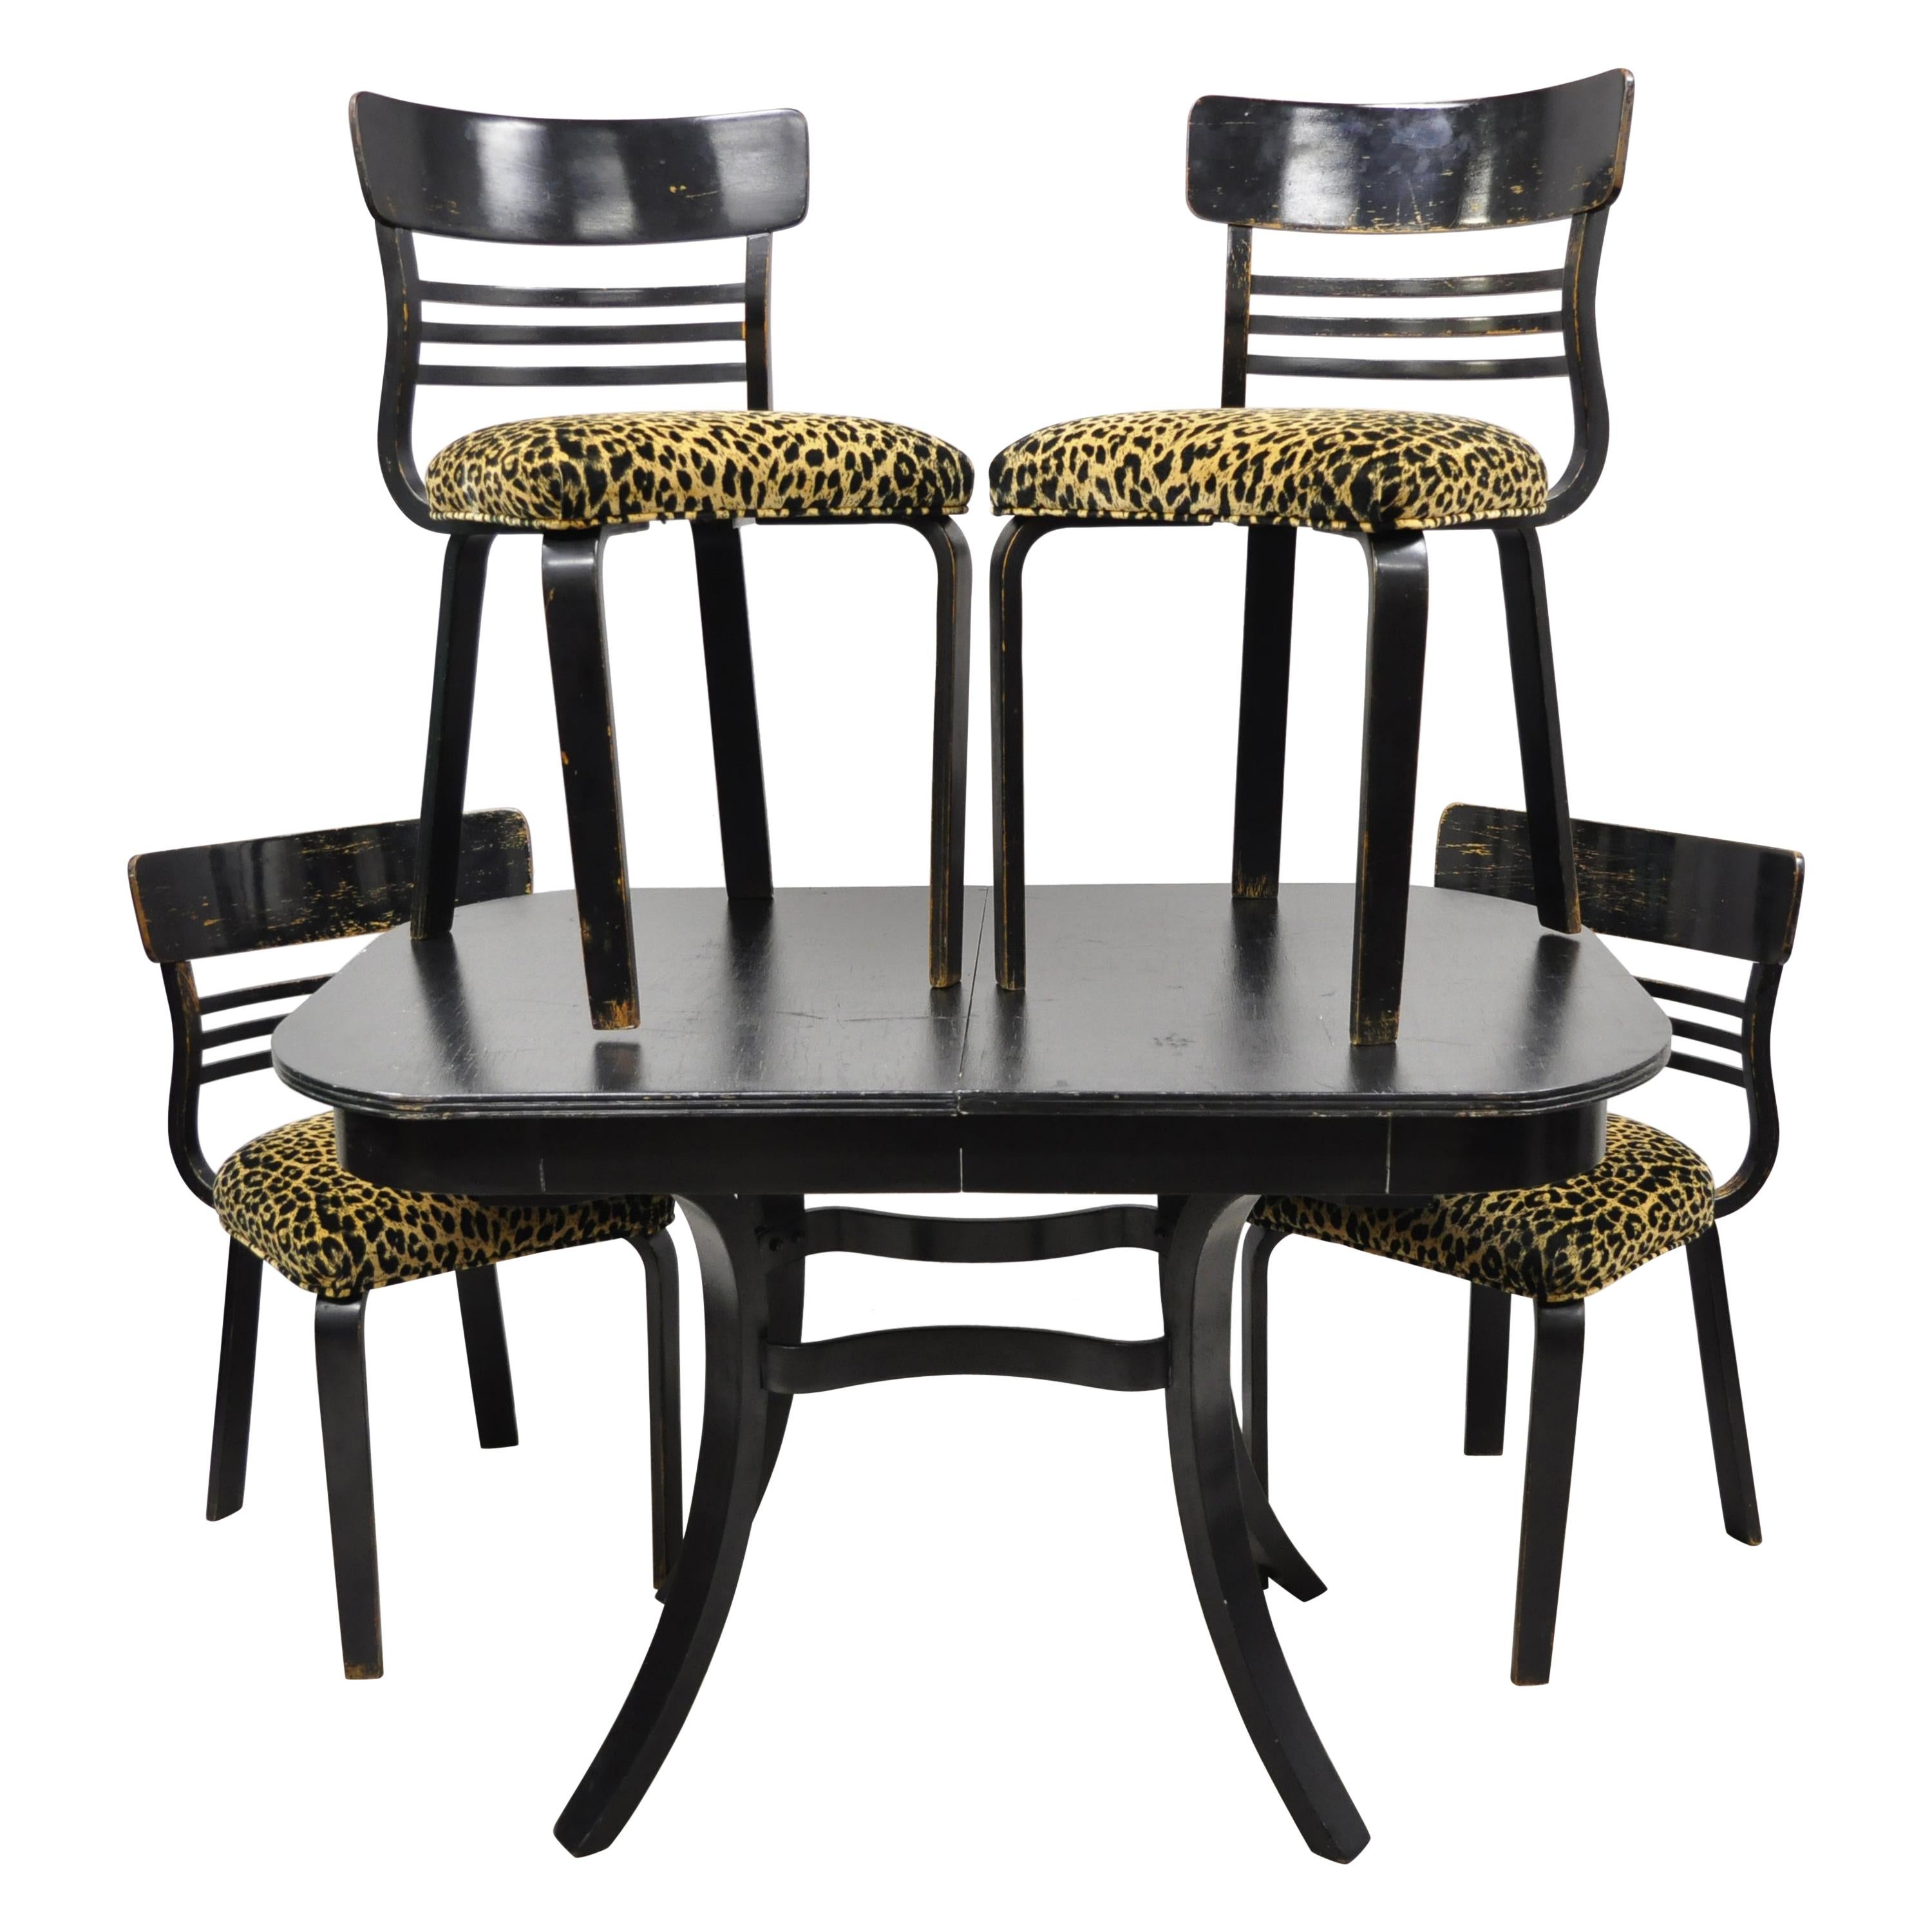 Austrian Thonet Bentwood Black Distressed Dining Set Table 4 Chairs, 5 Pieces For Sale